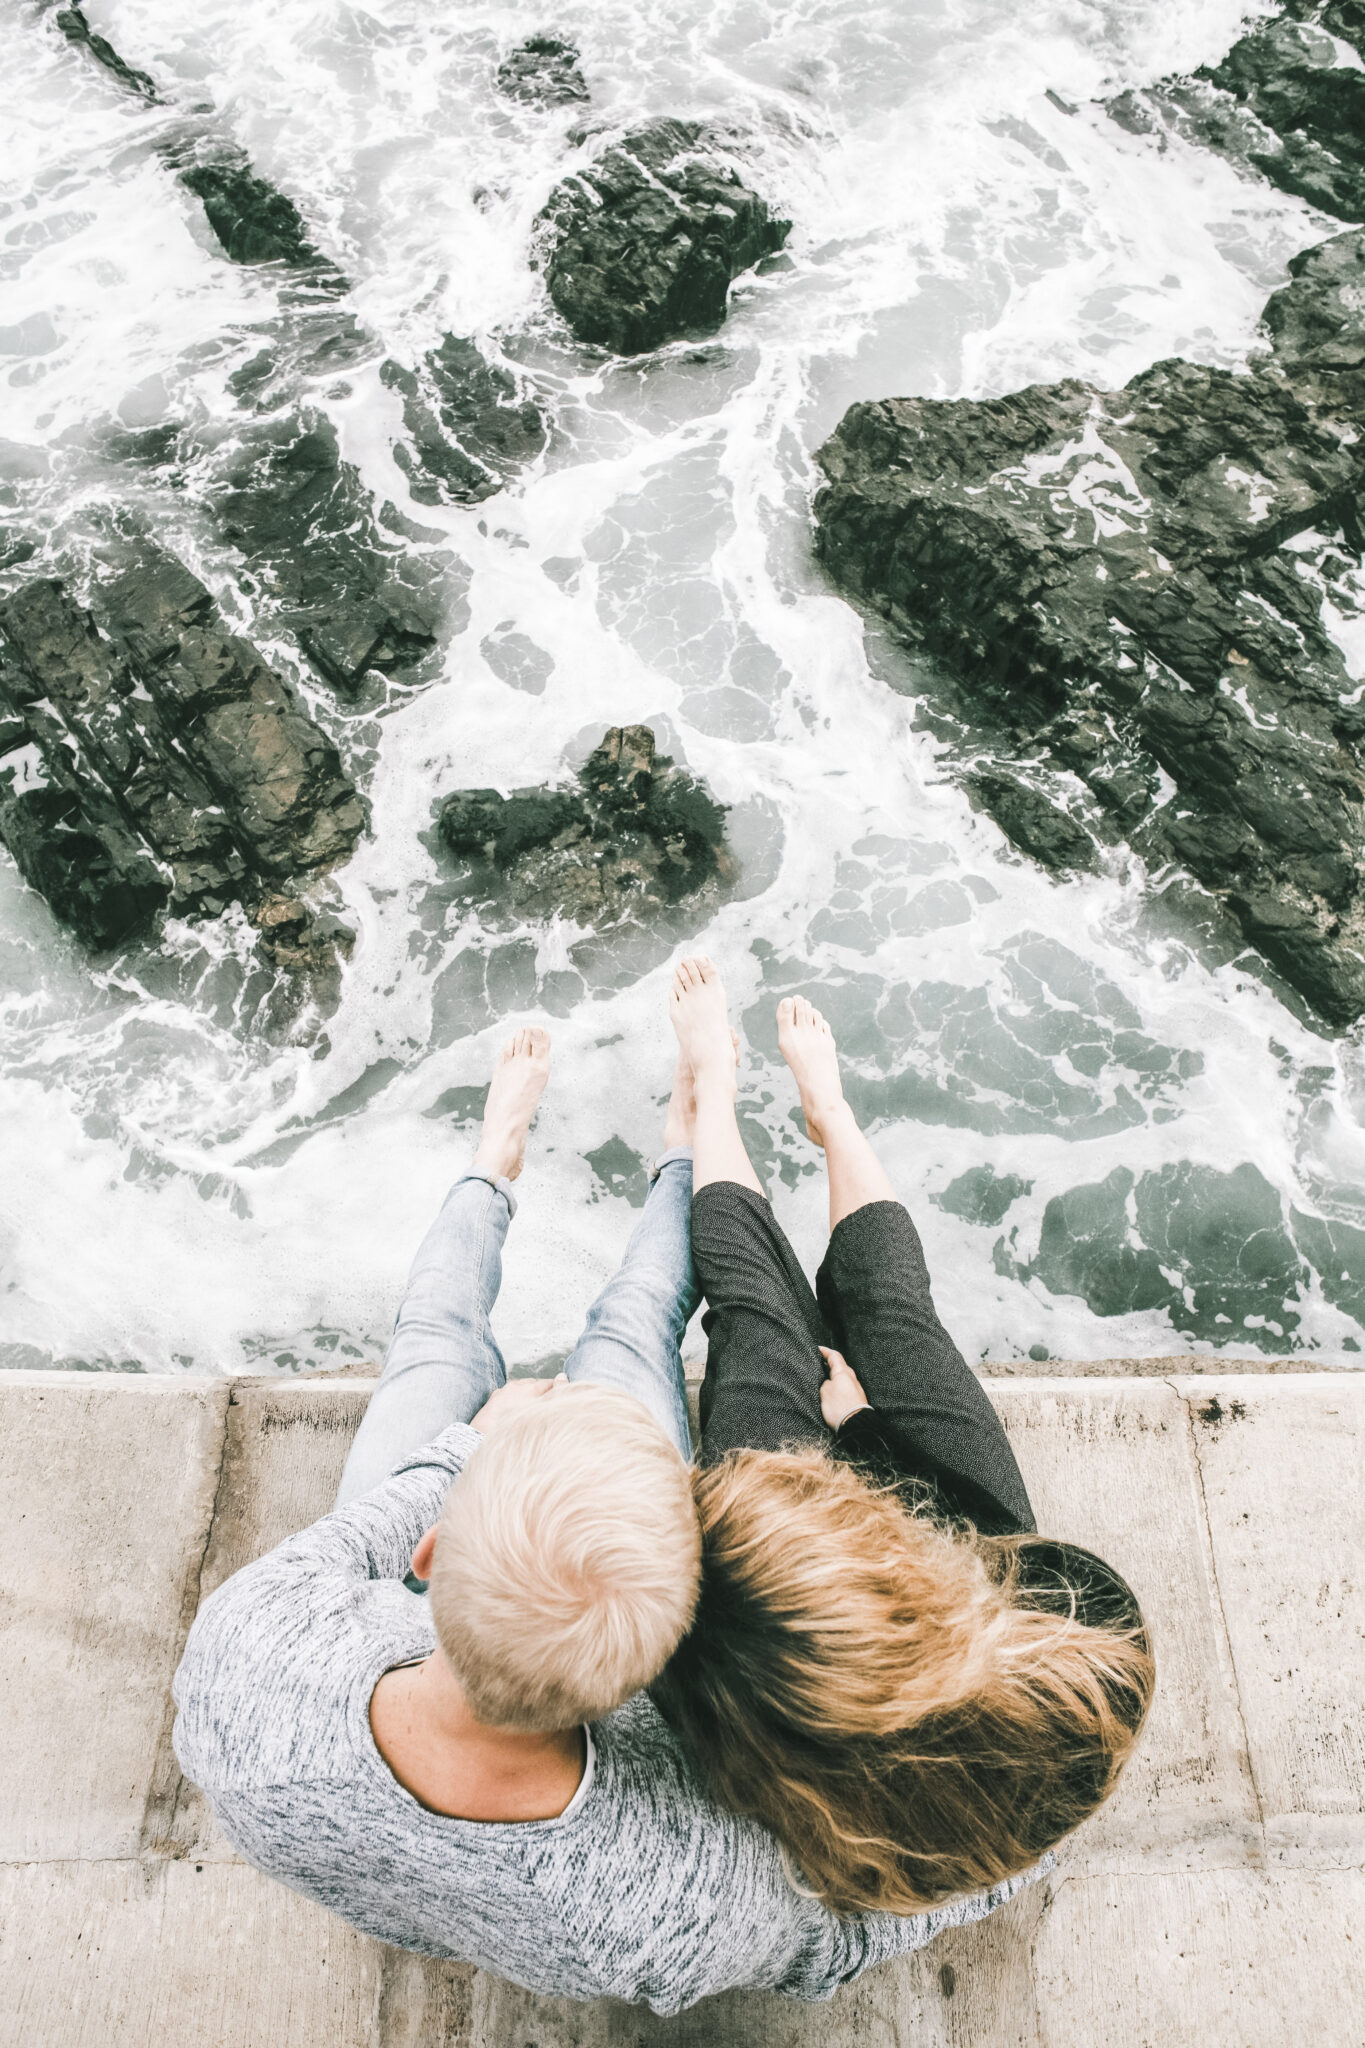 A couple sit together on a ledge and look out to waves crashing below. This article covers 4 things you should take seriously this year.